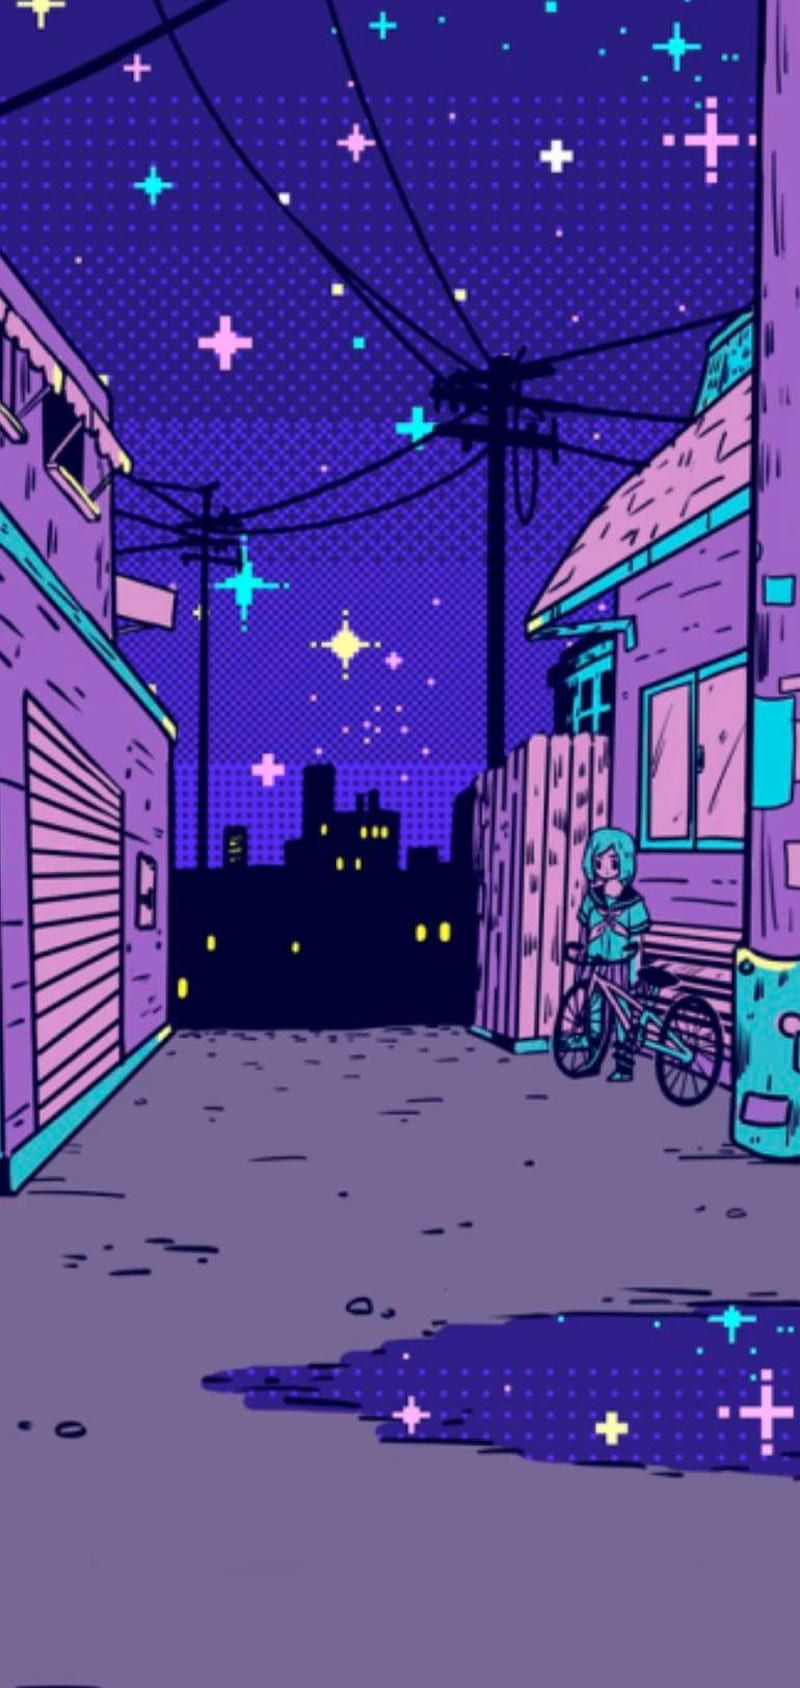 A purple and blue illustration of a person on a bike looking up at the stars - Vaporwave, lo fi